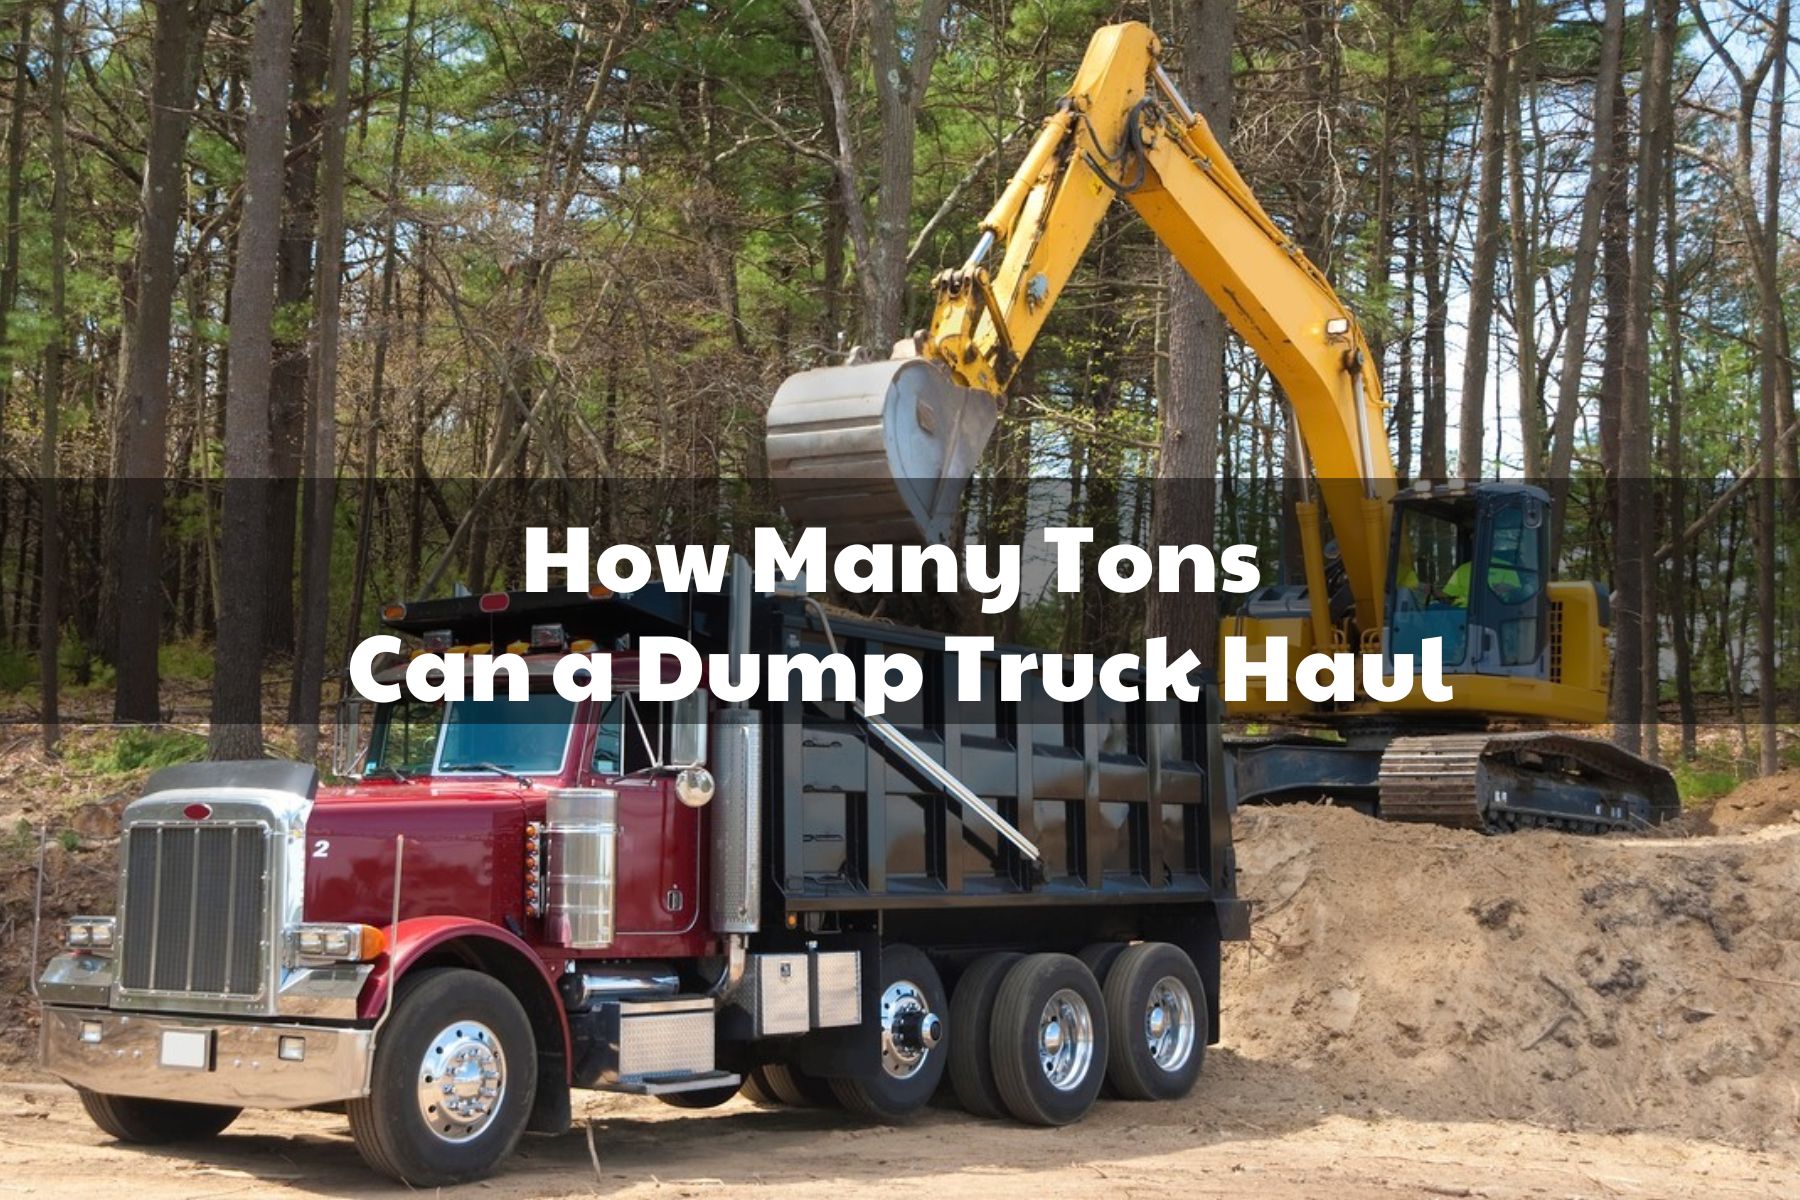 How Many Tons Can a Dump Truck Haul